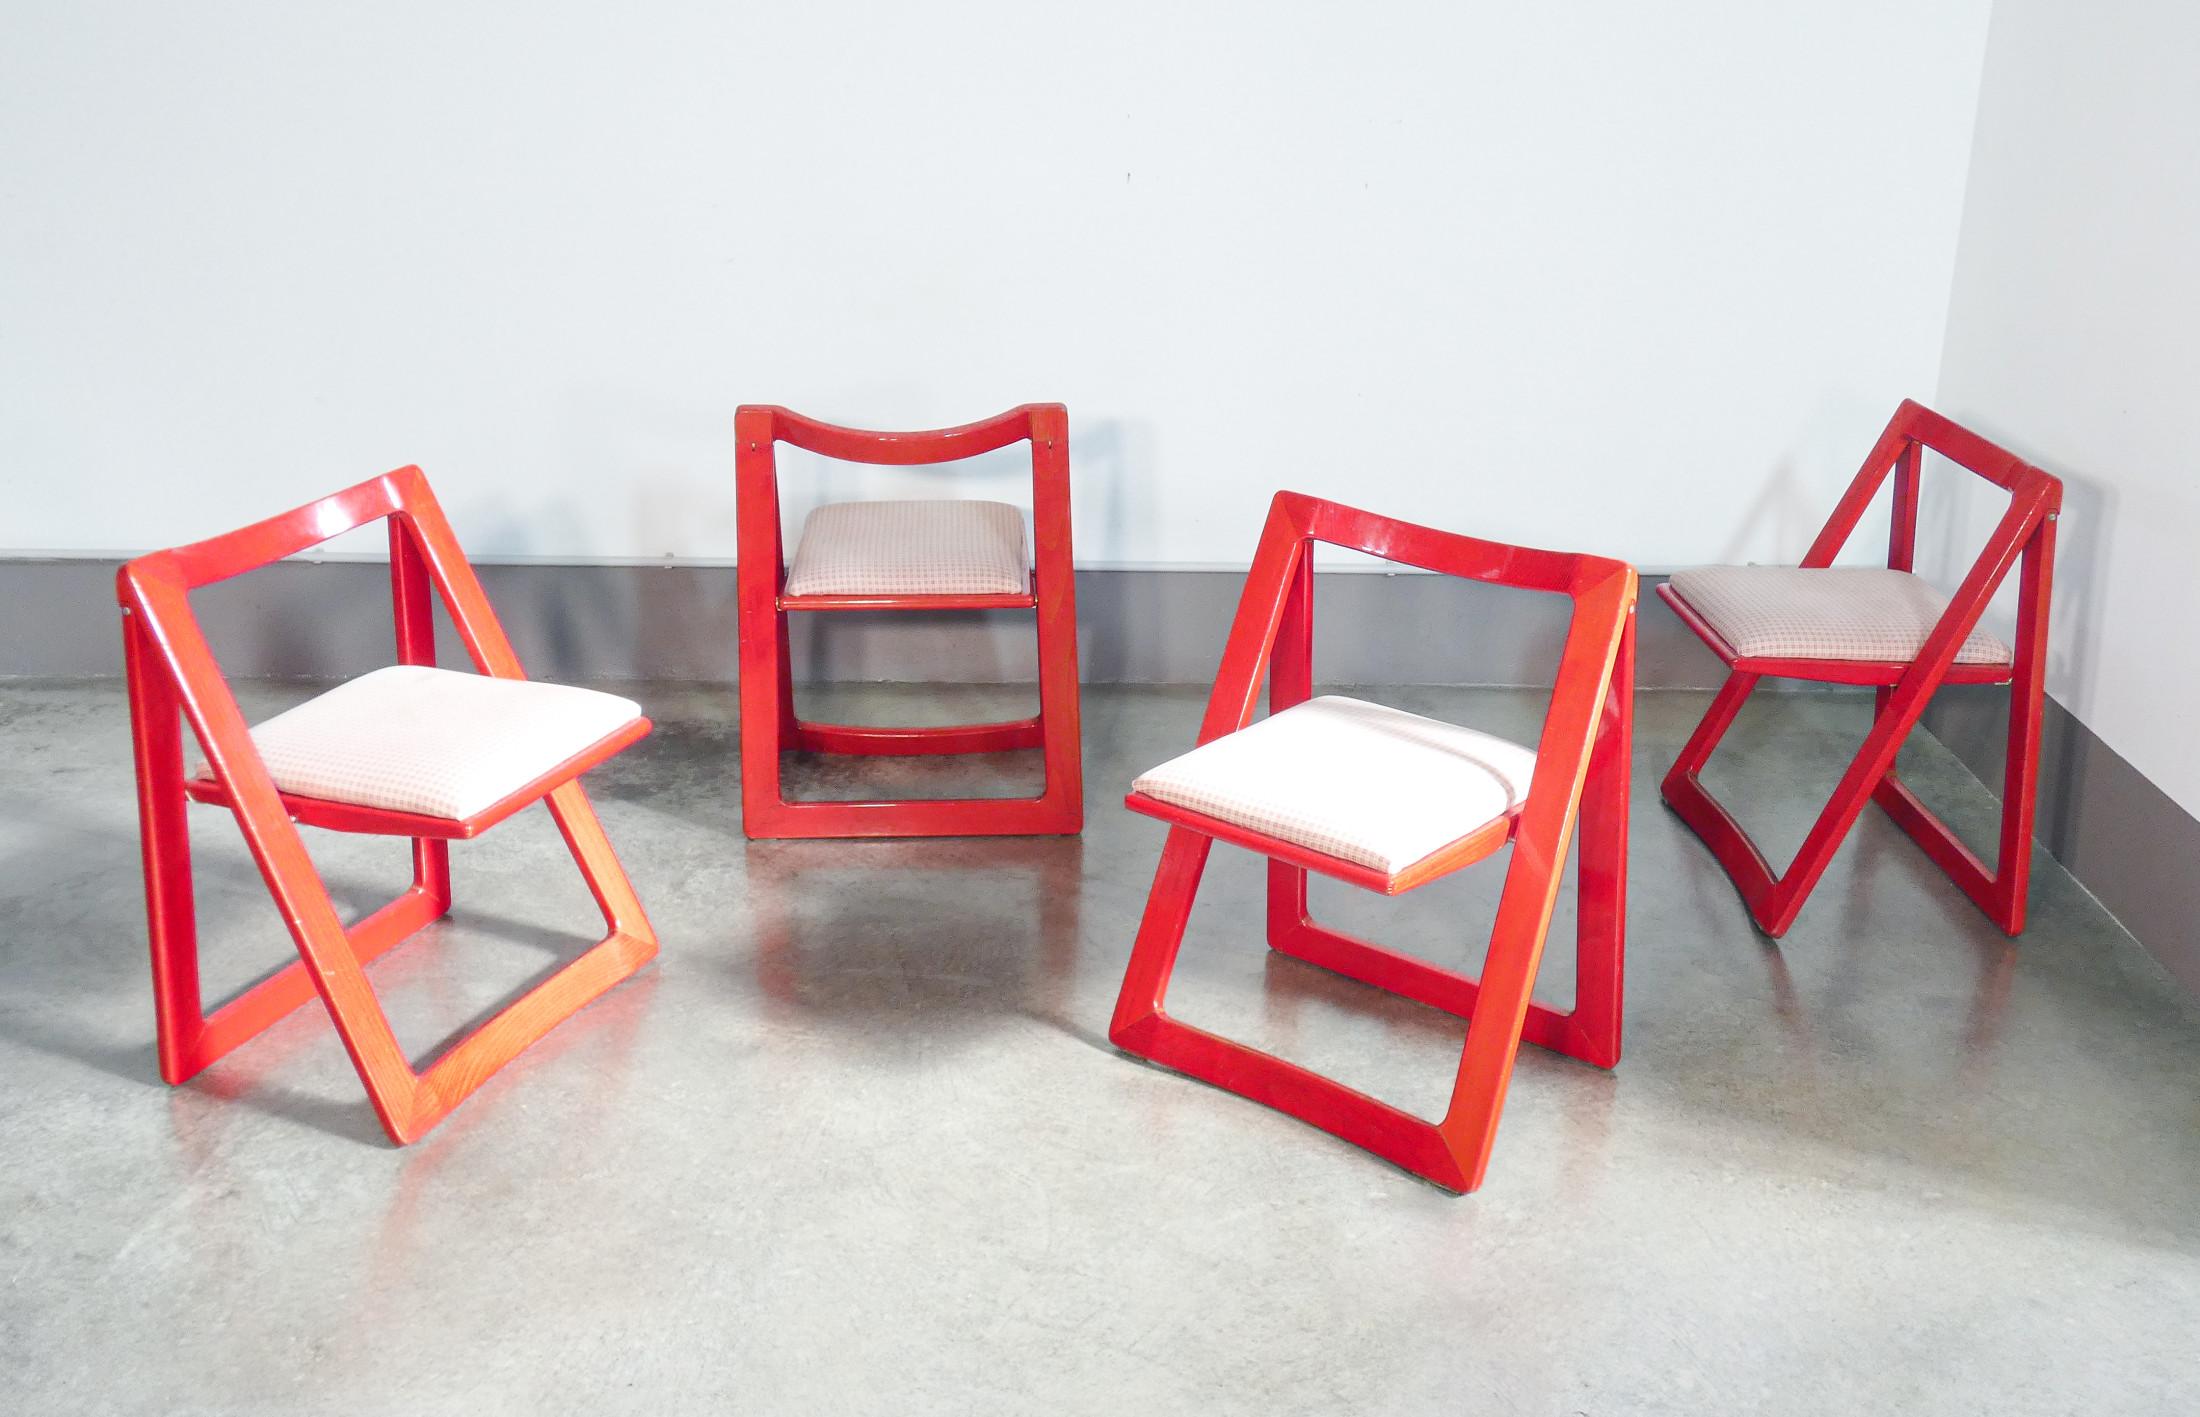 Set of four chairs
TRIESTE, design
Pierangela D'ANIELLO
and Aldo JACOBER
for BAZZANI,
red model.

ORIGIN
Italy

PERIOD
1966

DESIGNER
Pierangela D'ANIELLO
and Aldo JACOBER

MARK
BAZZANI

MODEL
Trieste

MATERIALS
Red lacquered wood,
upholstered